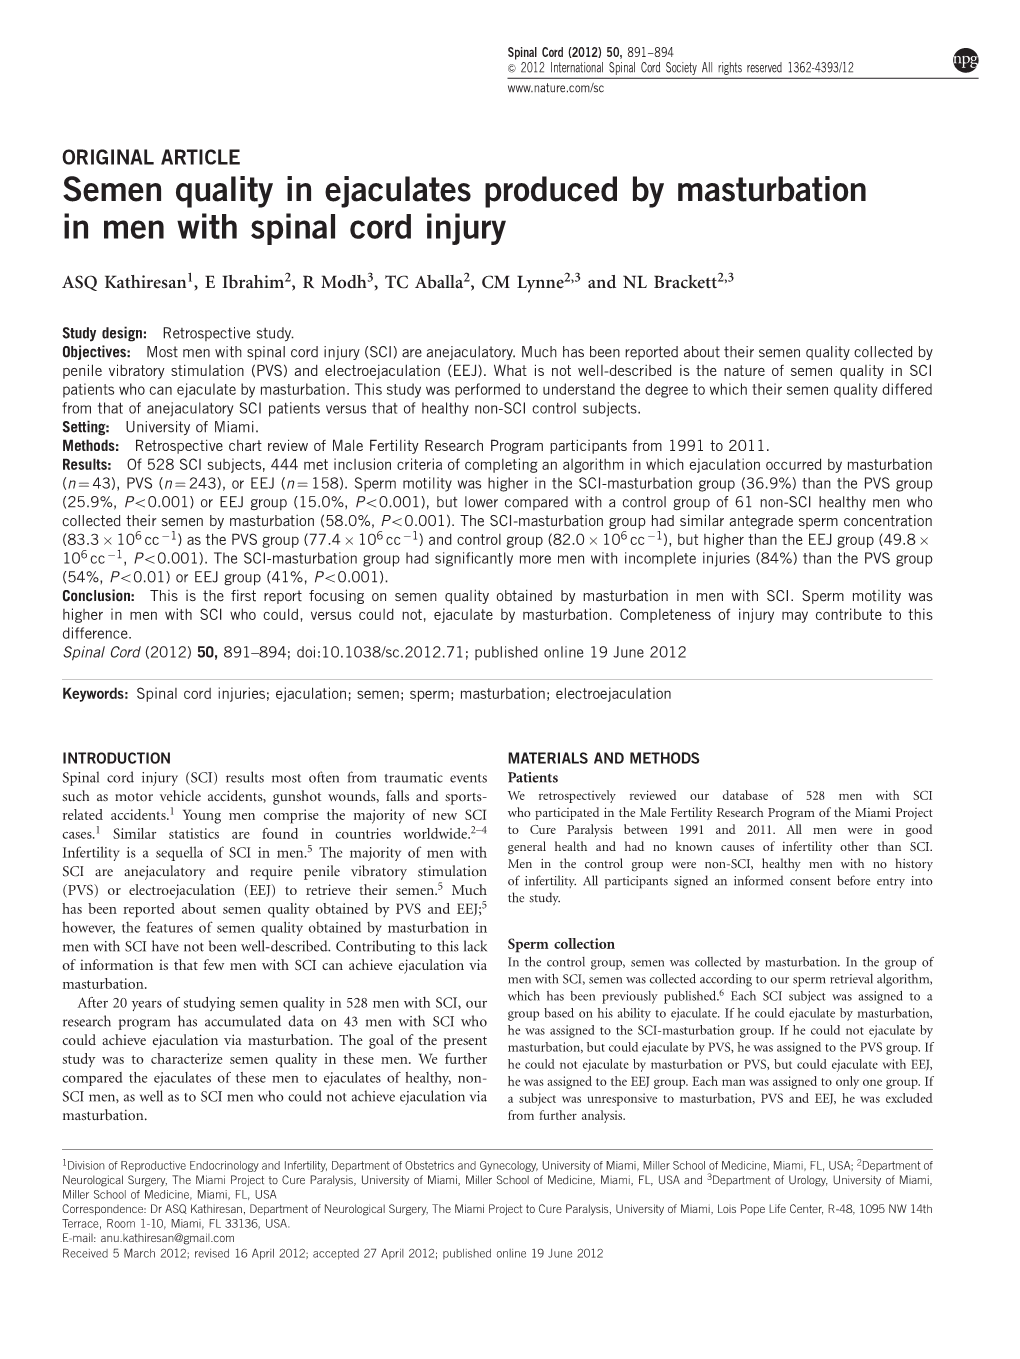 Semen Quality in Ejaculates Produced by Masturbation in Men with Spinal Cord Injury